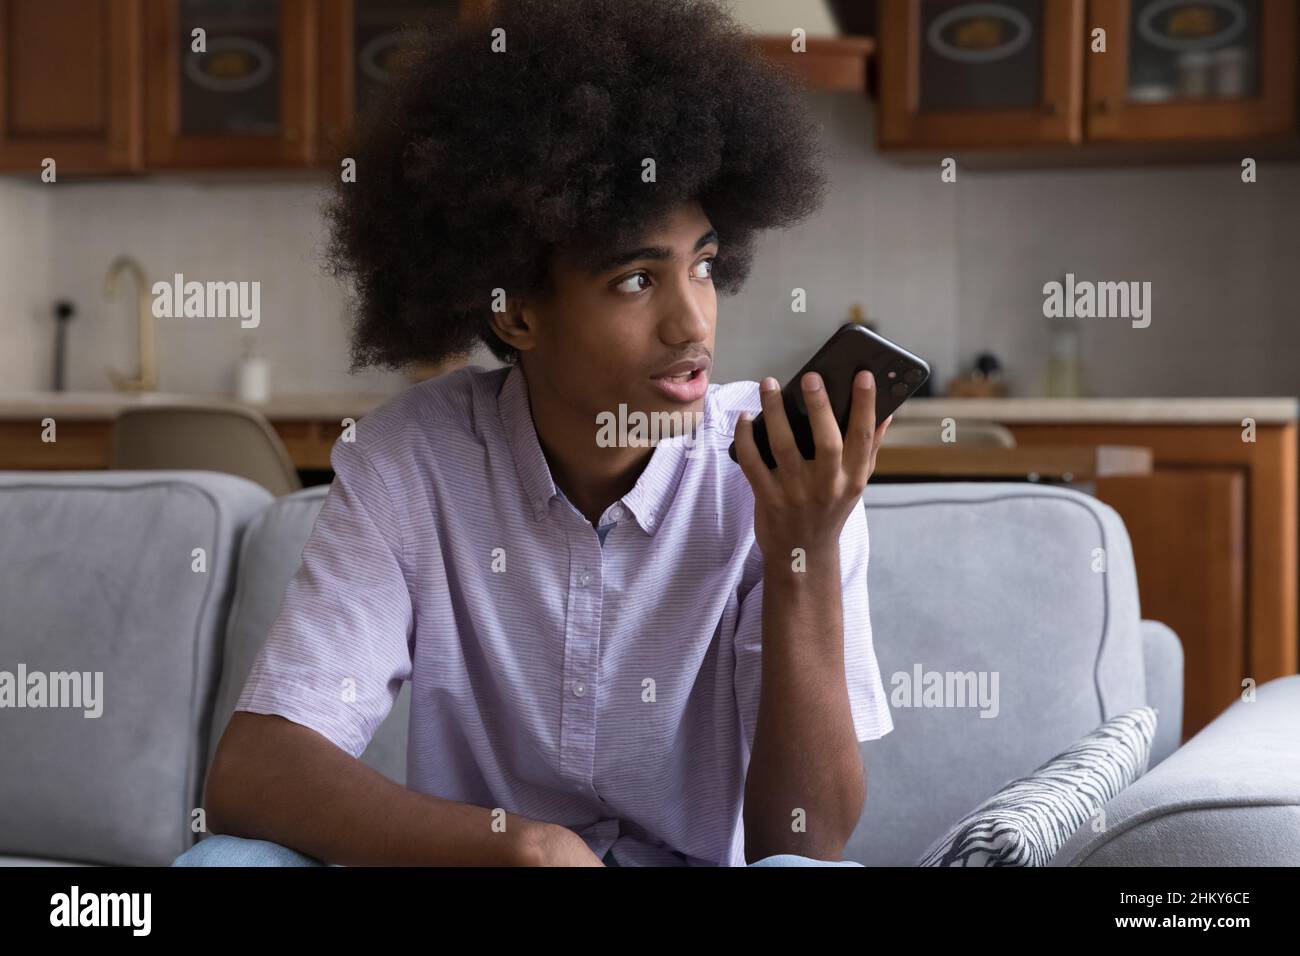 Serious teen African hipster guy recording audio message Stock Photo